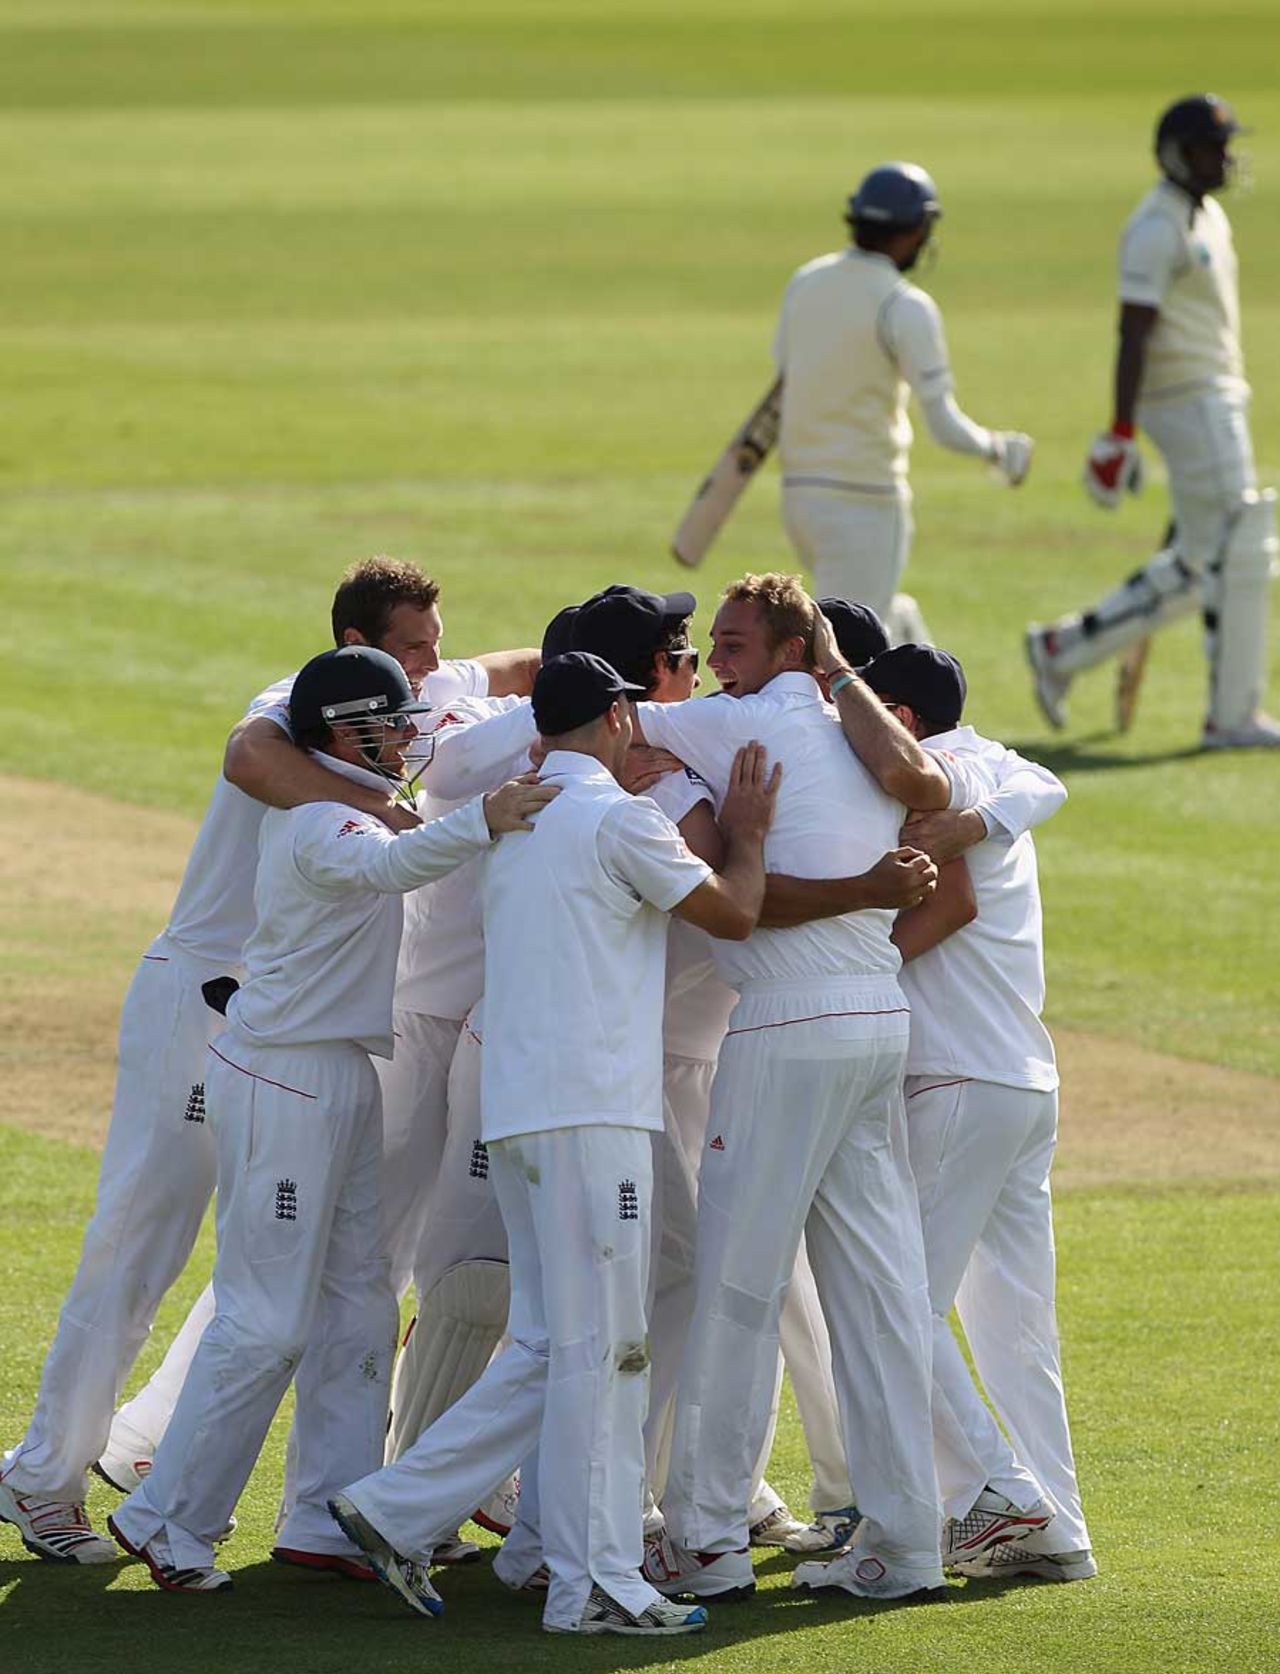 England get into their victory huddle, England v Sri Lanka, 1st Test, Cardiff, 5th day, May 30, 2011